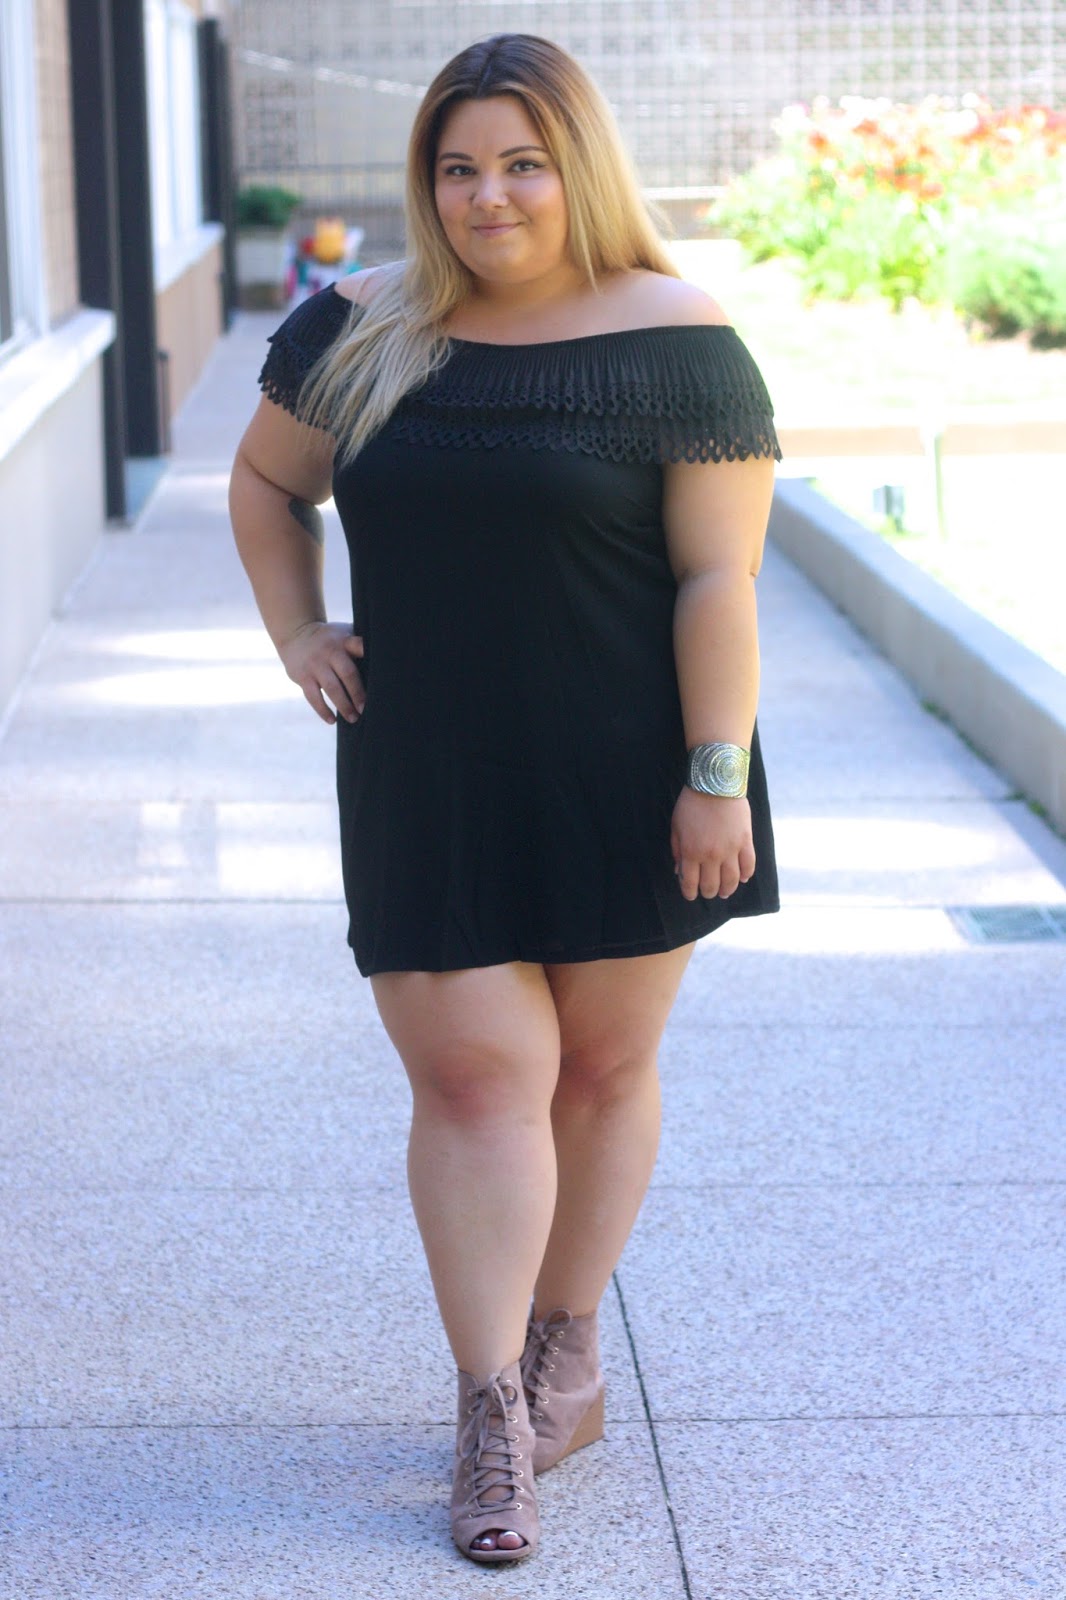 Perfectly Priscilla, natalie in the city, natalie craig, plus size fashion blogger, off the shoulder dress, latina, chicago fashion blogger, plus size fashion, plus size off the shoulder, Forever 21 plus